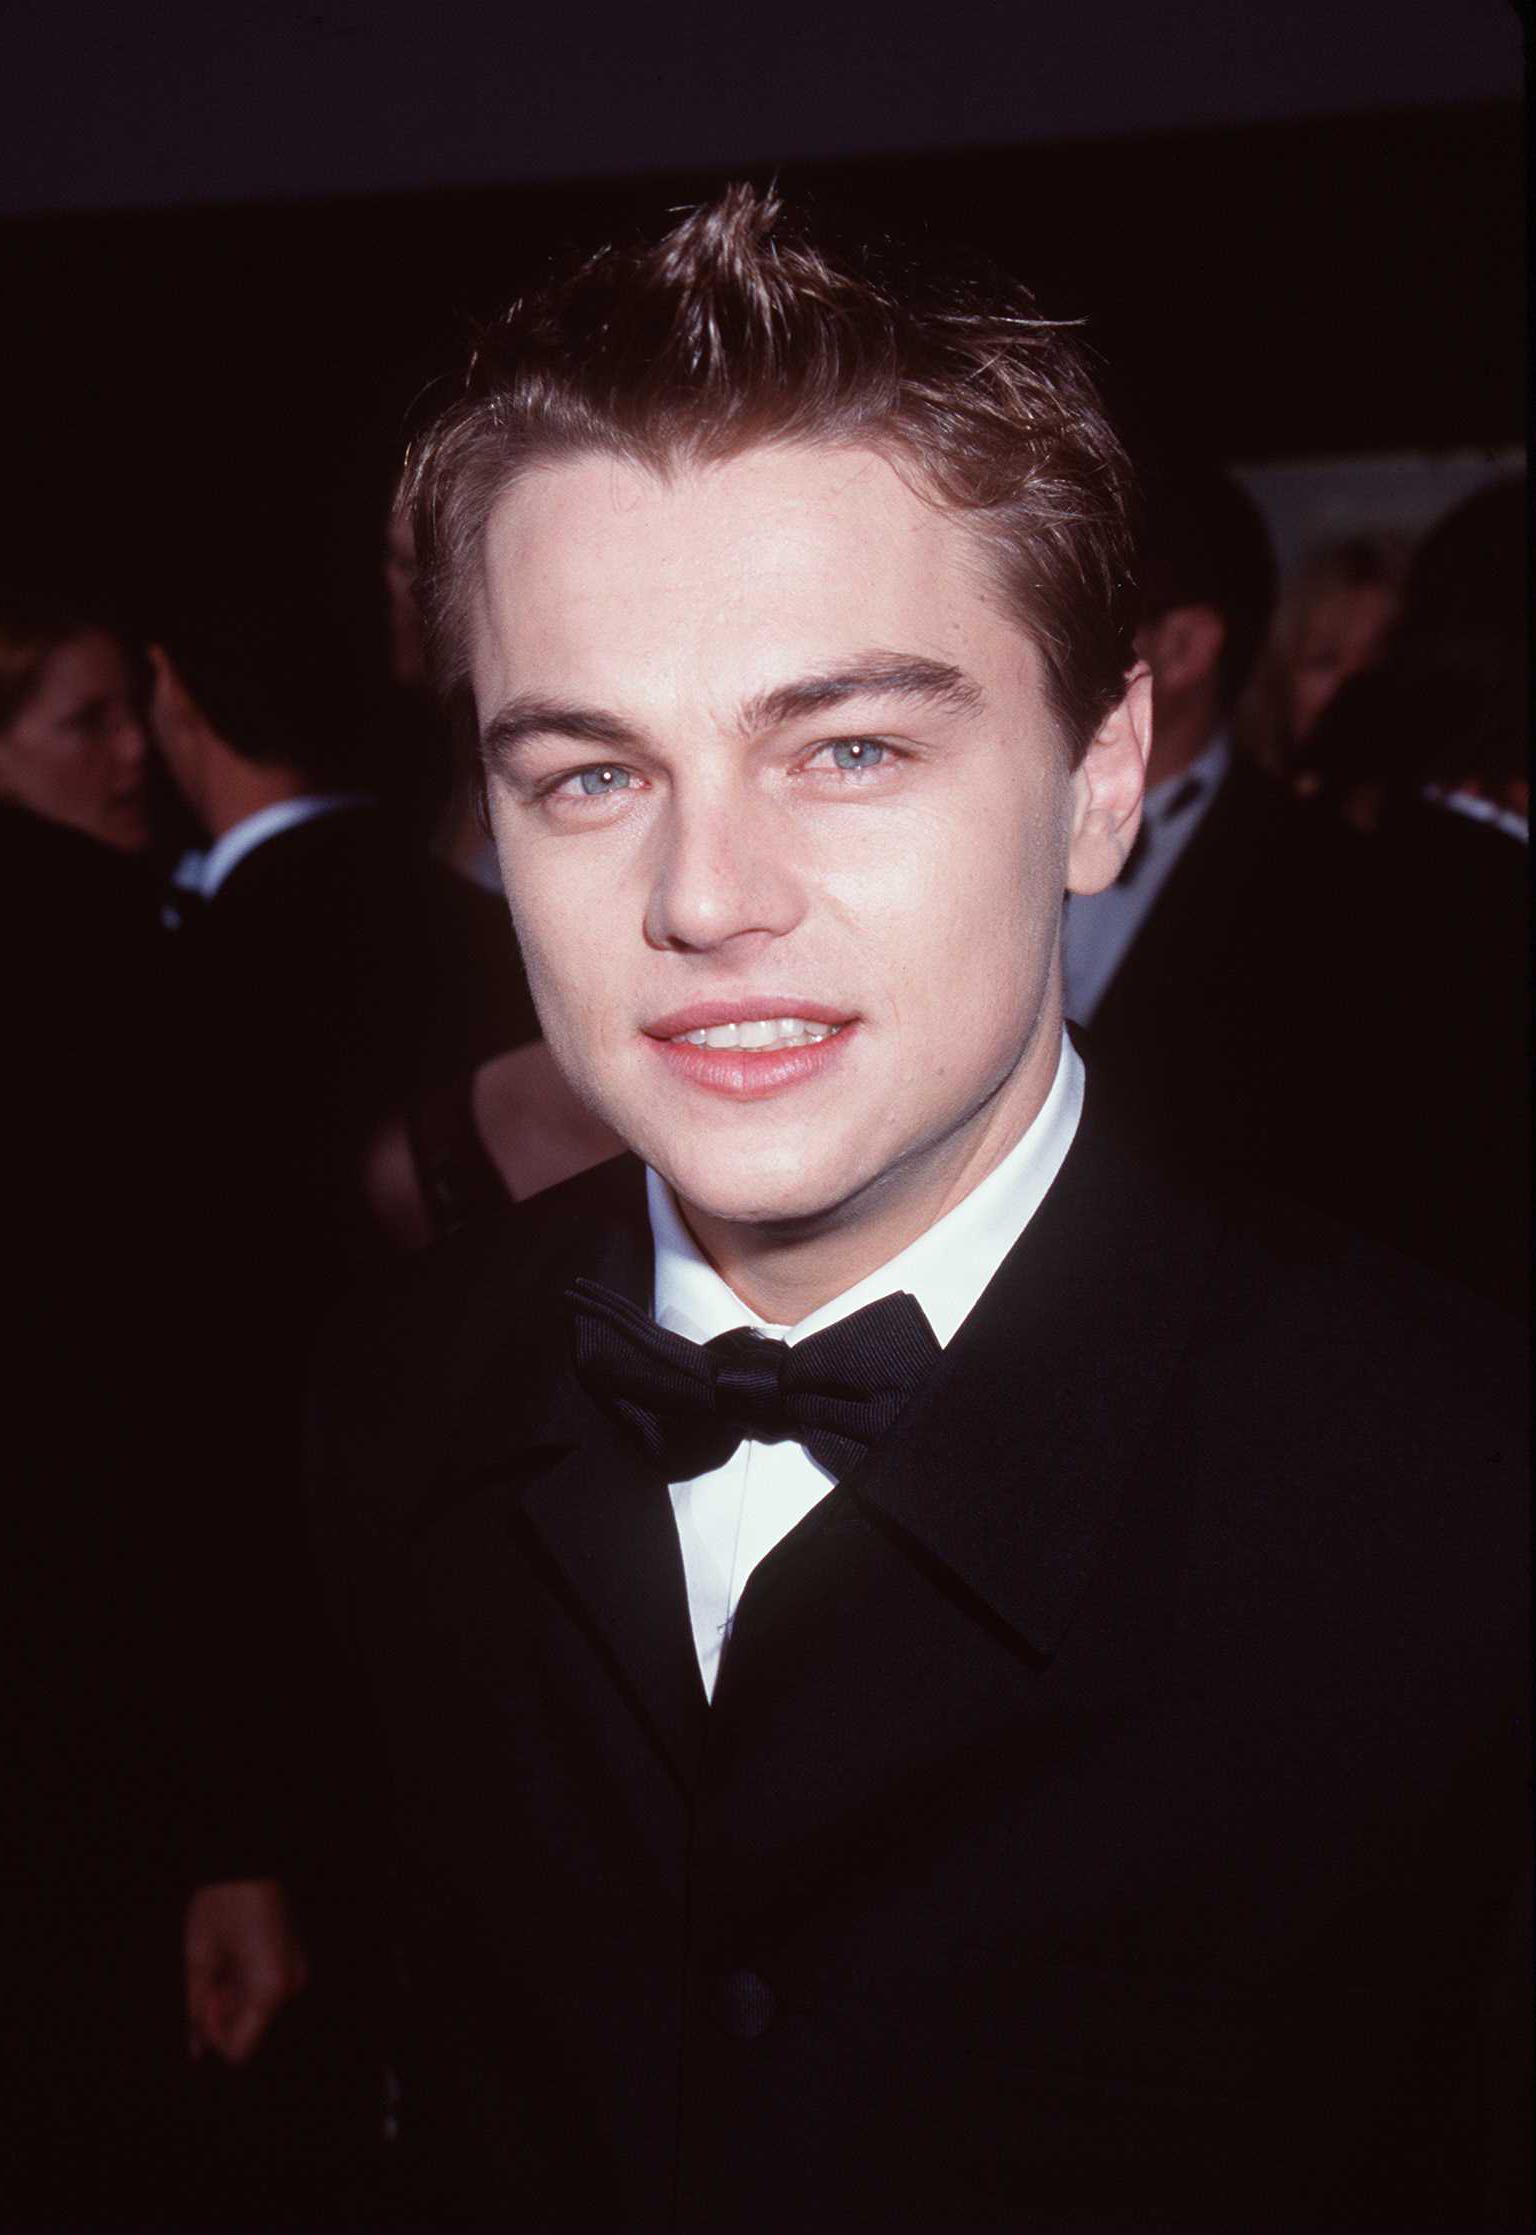 Leonardo DiCaprio attends the Golden Globe Awards on January 18, 1998 in Beverly Hills, California | Source: Getty Images